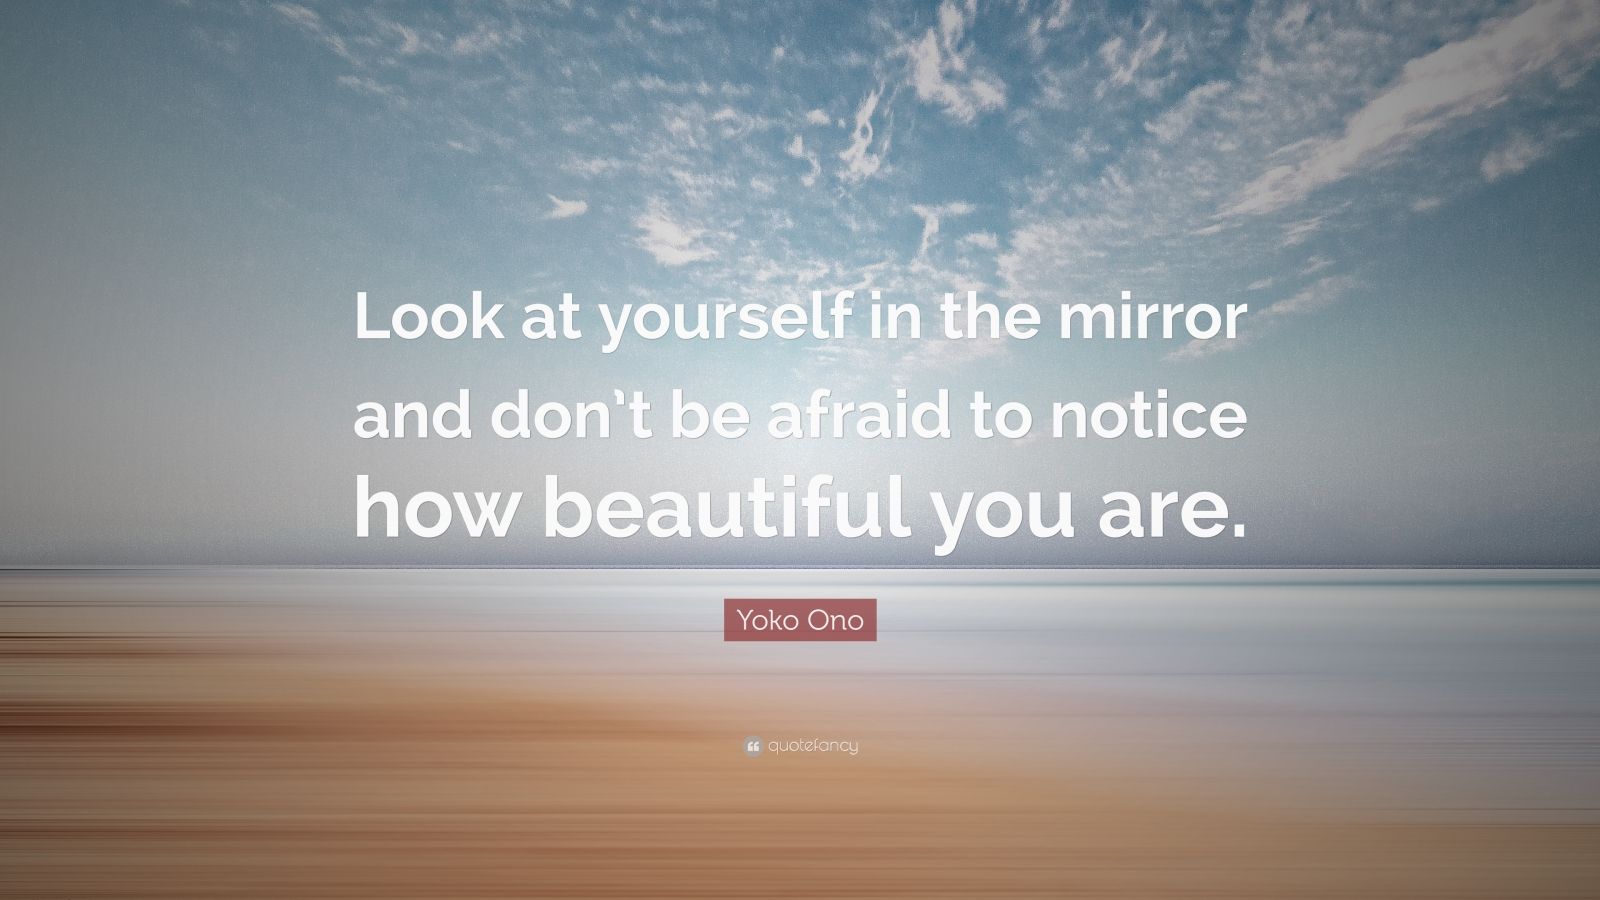 Yoko Ono Quote: “Look at yourself in the mirror and don’t be afraid to ...